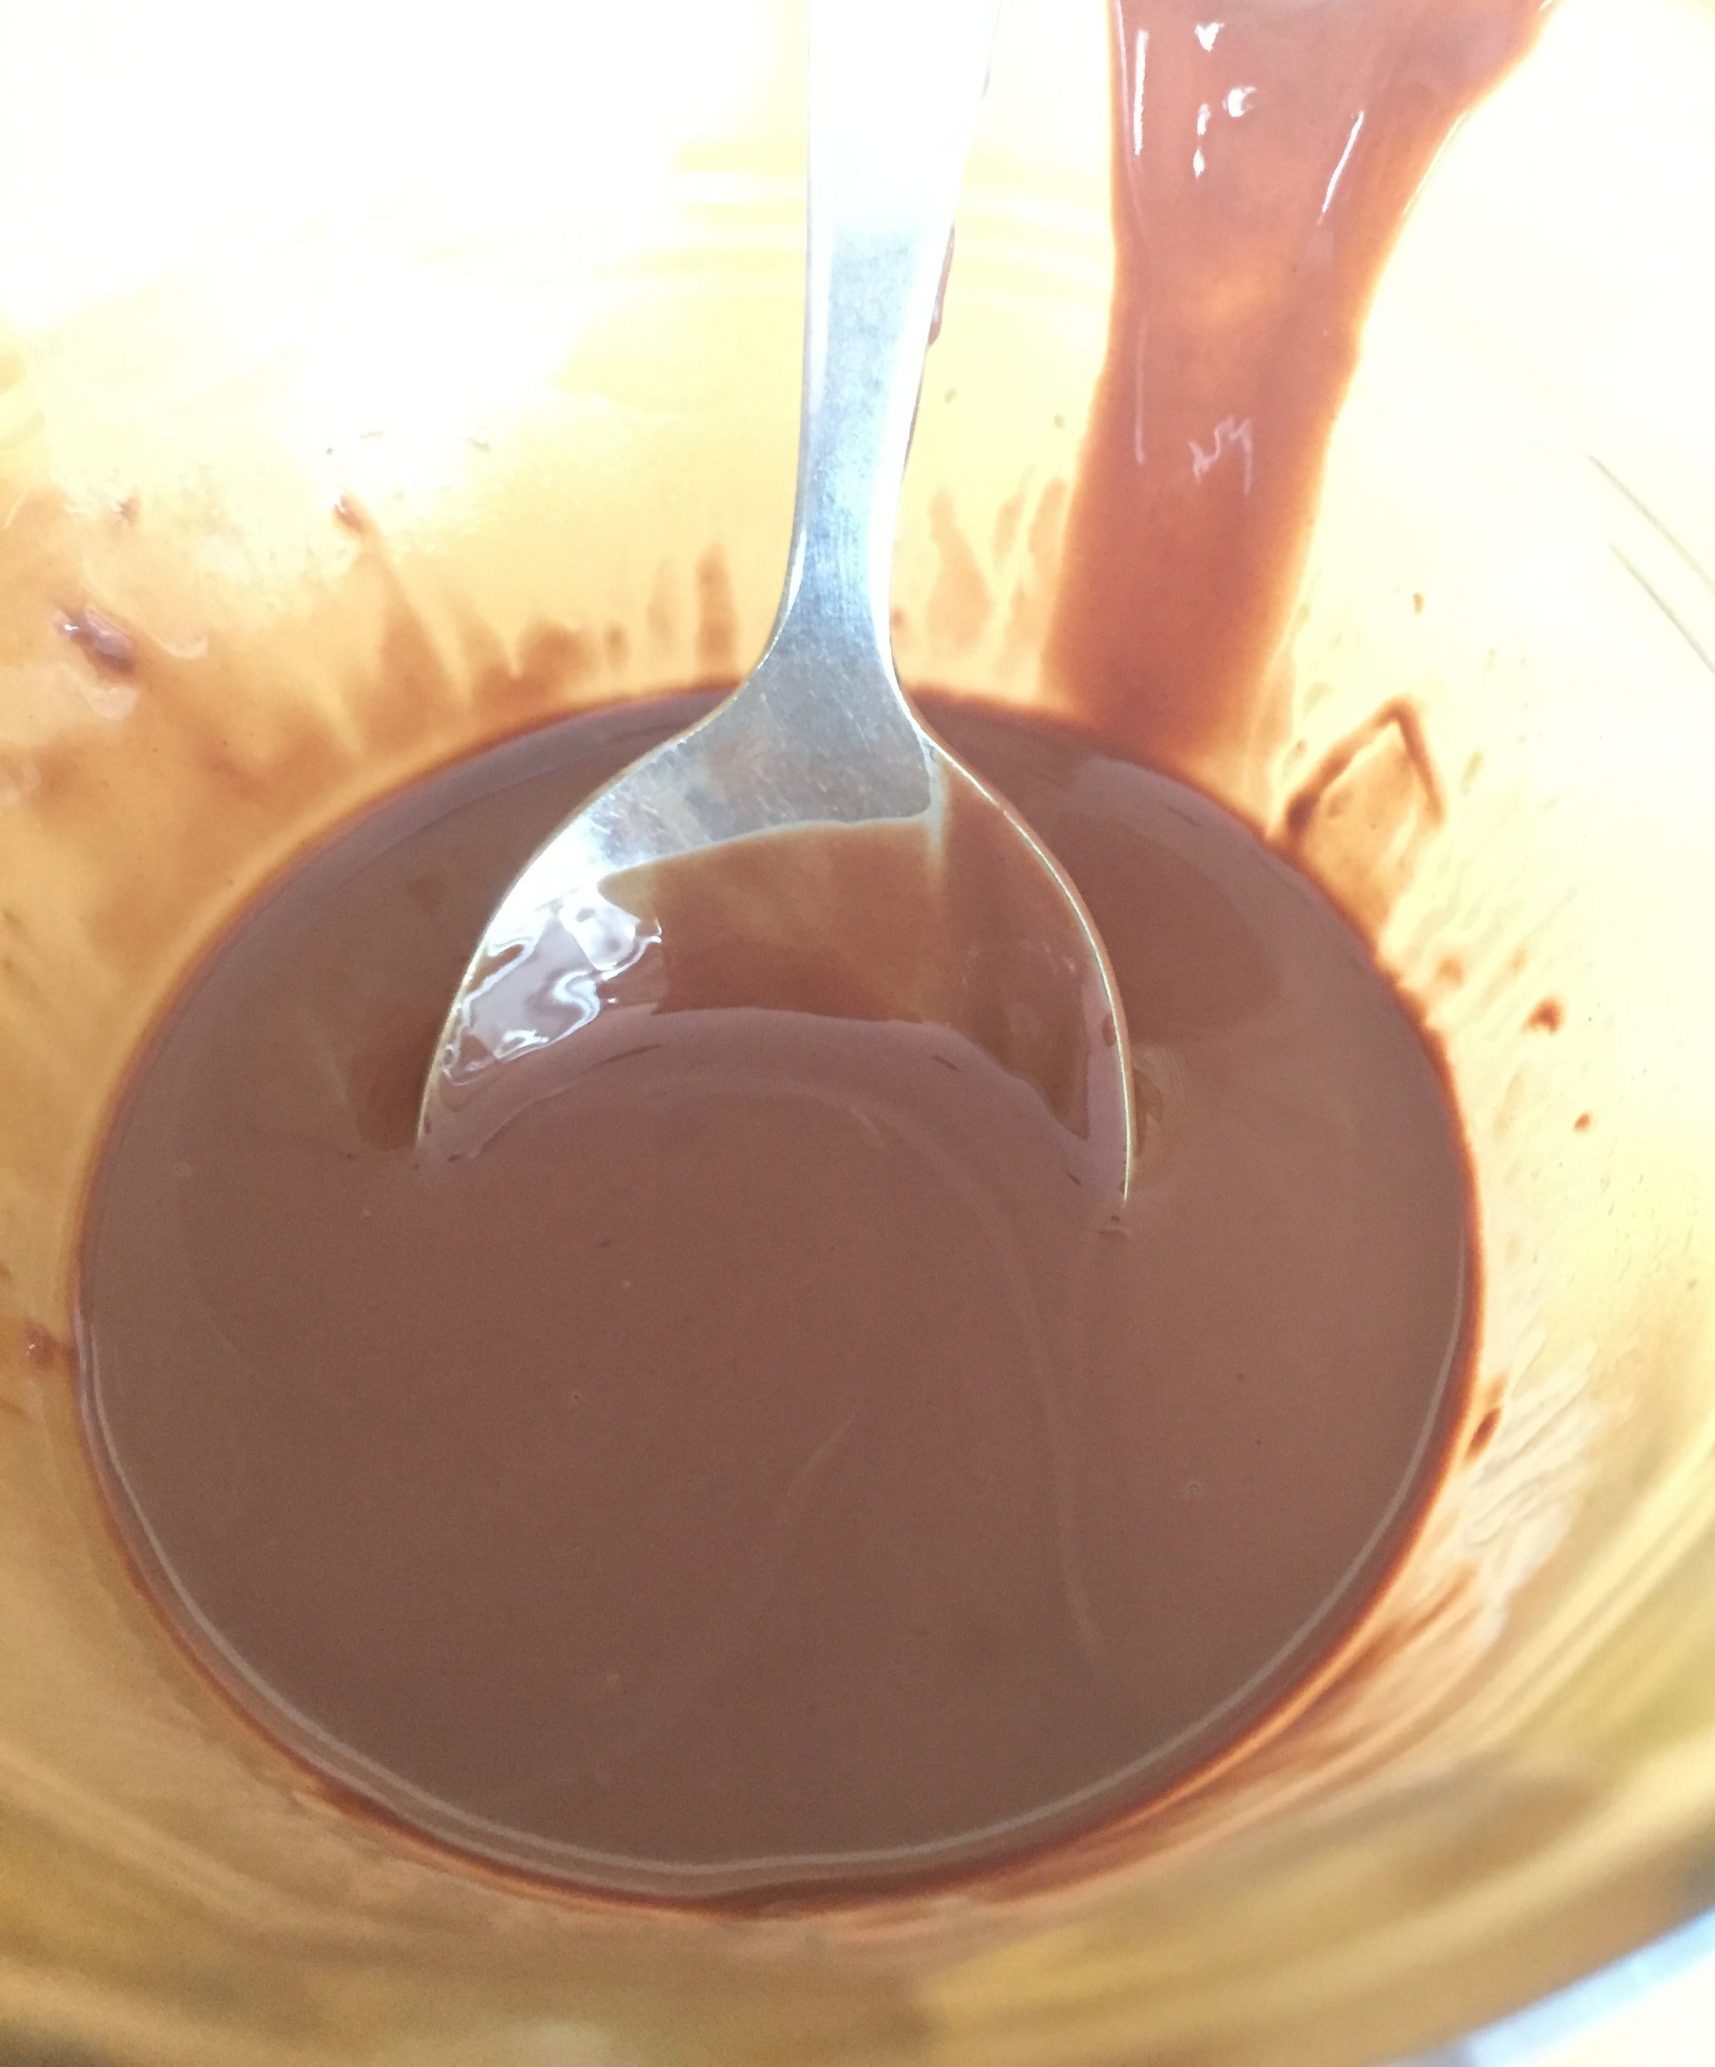 Melted chocolate with coconut oil added before microwaving